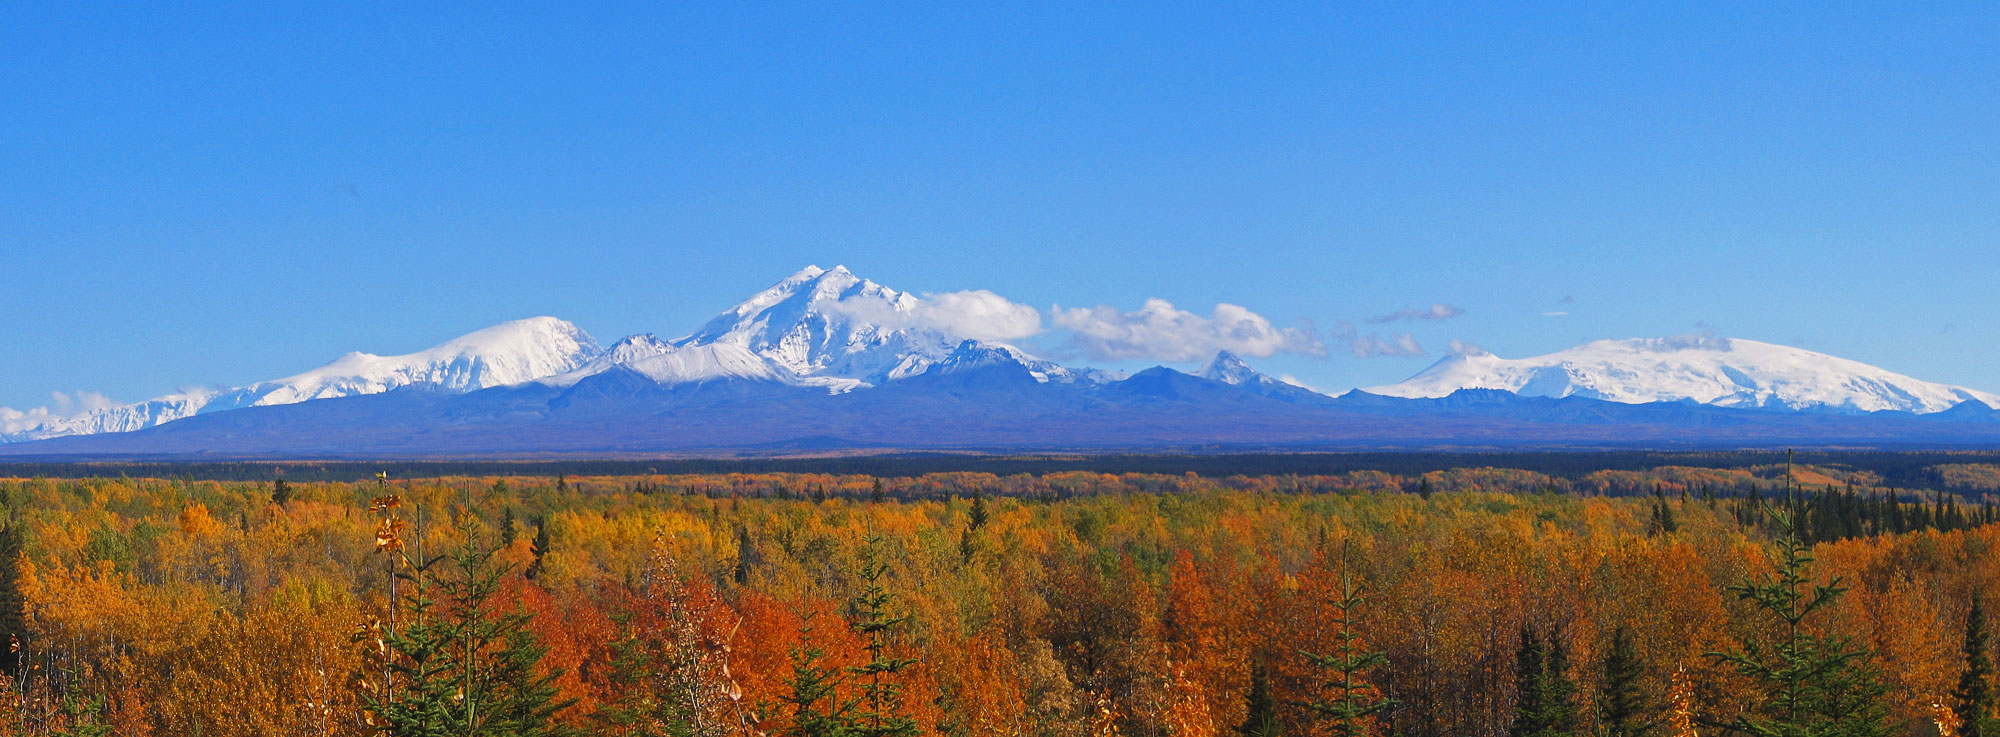 Photograph of the Wragell Mountains, Alaska. The photo shows a landscape with a snow-capped mountain range rising against a blue sky in the background. In the foreground, trees in fall colors blanket a flat landscape.